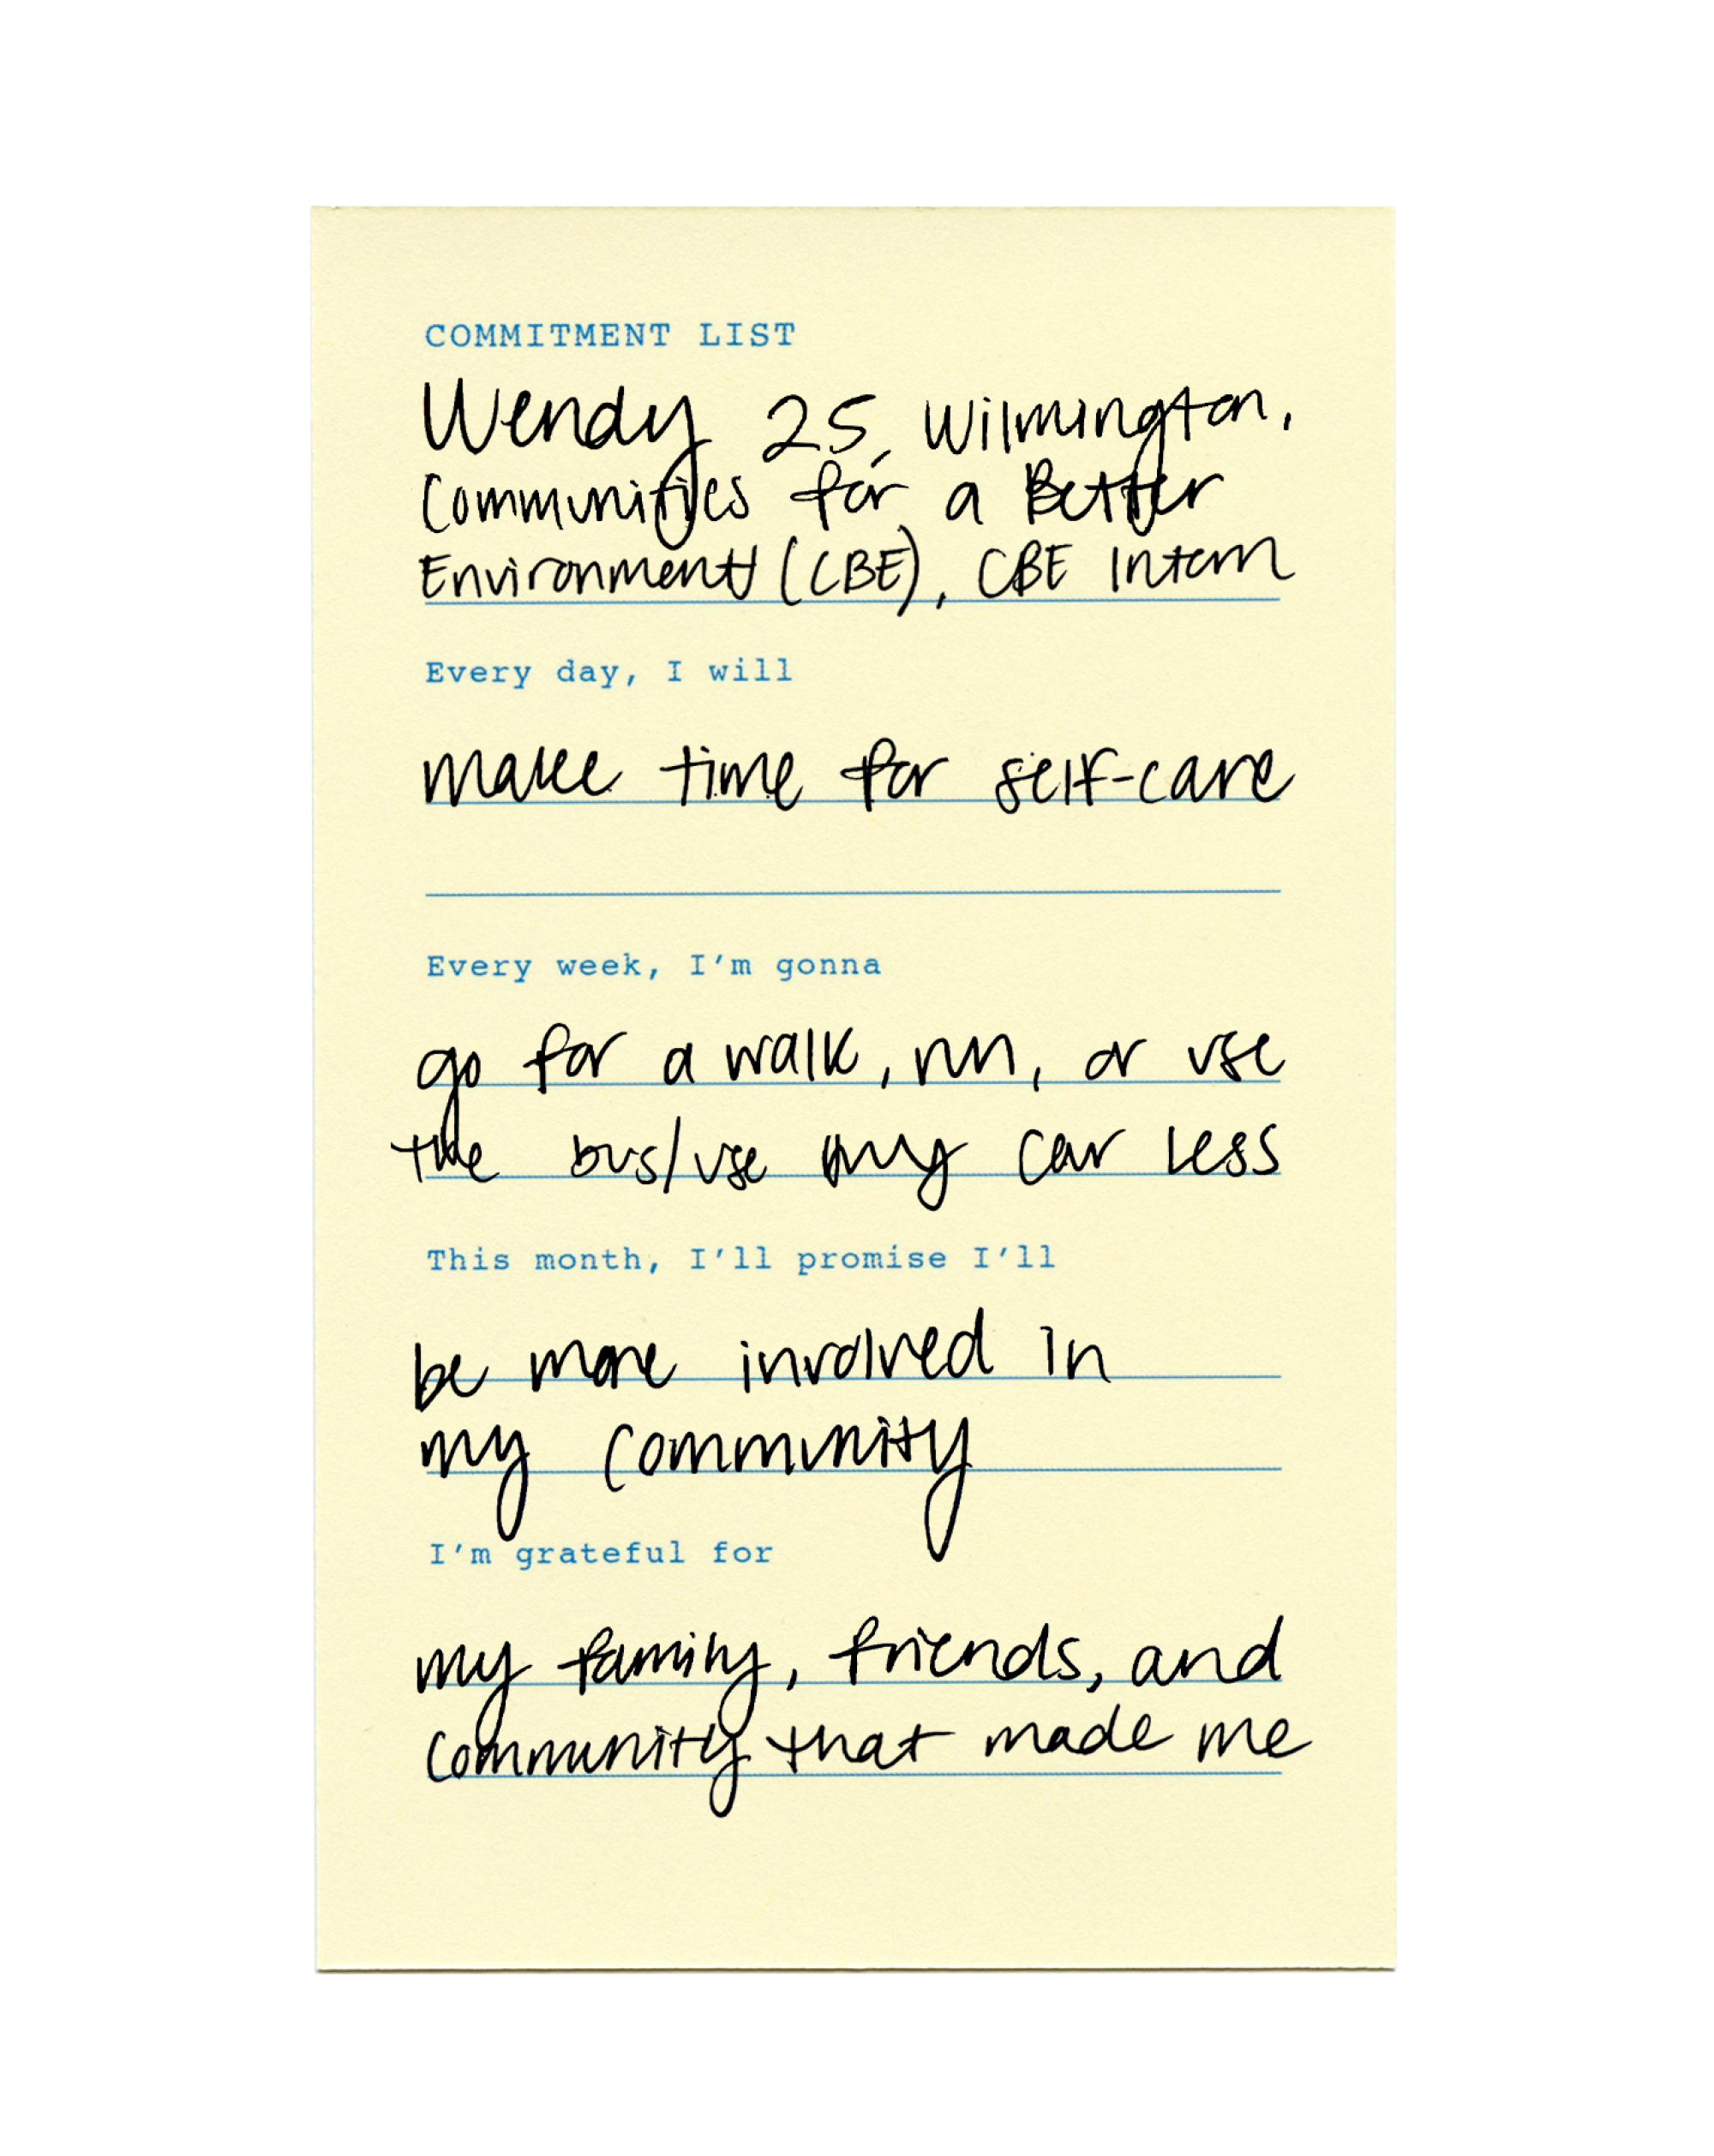 Wendy Miranda's commitment list in her own handwriting says she will make more time for self-care.